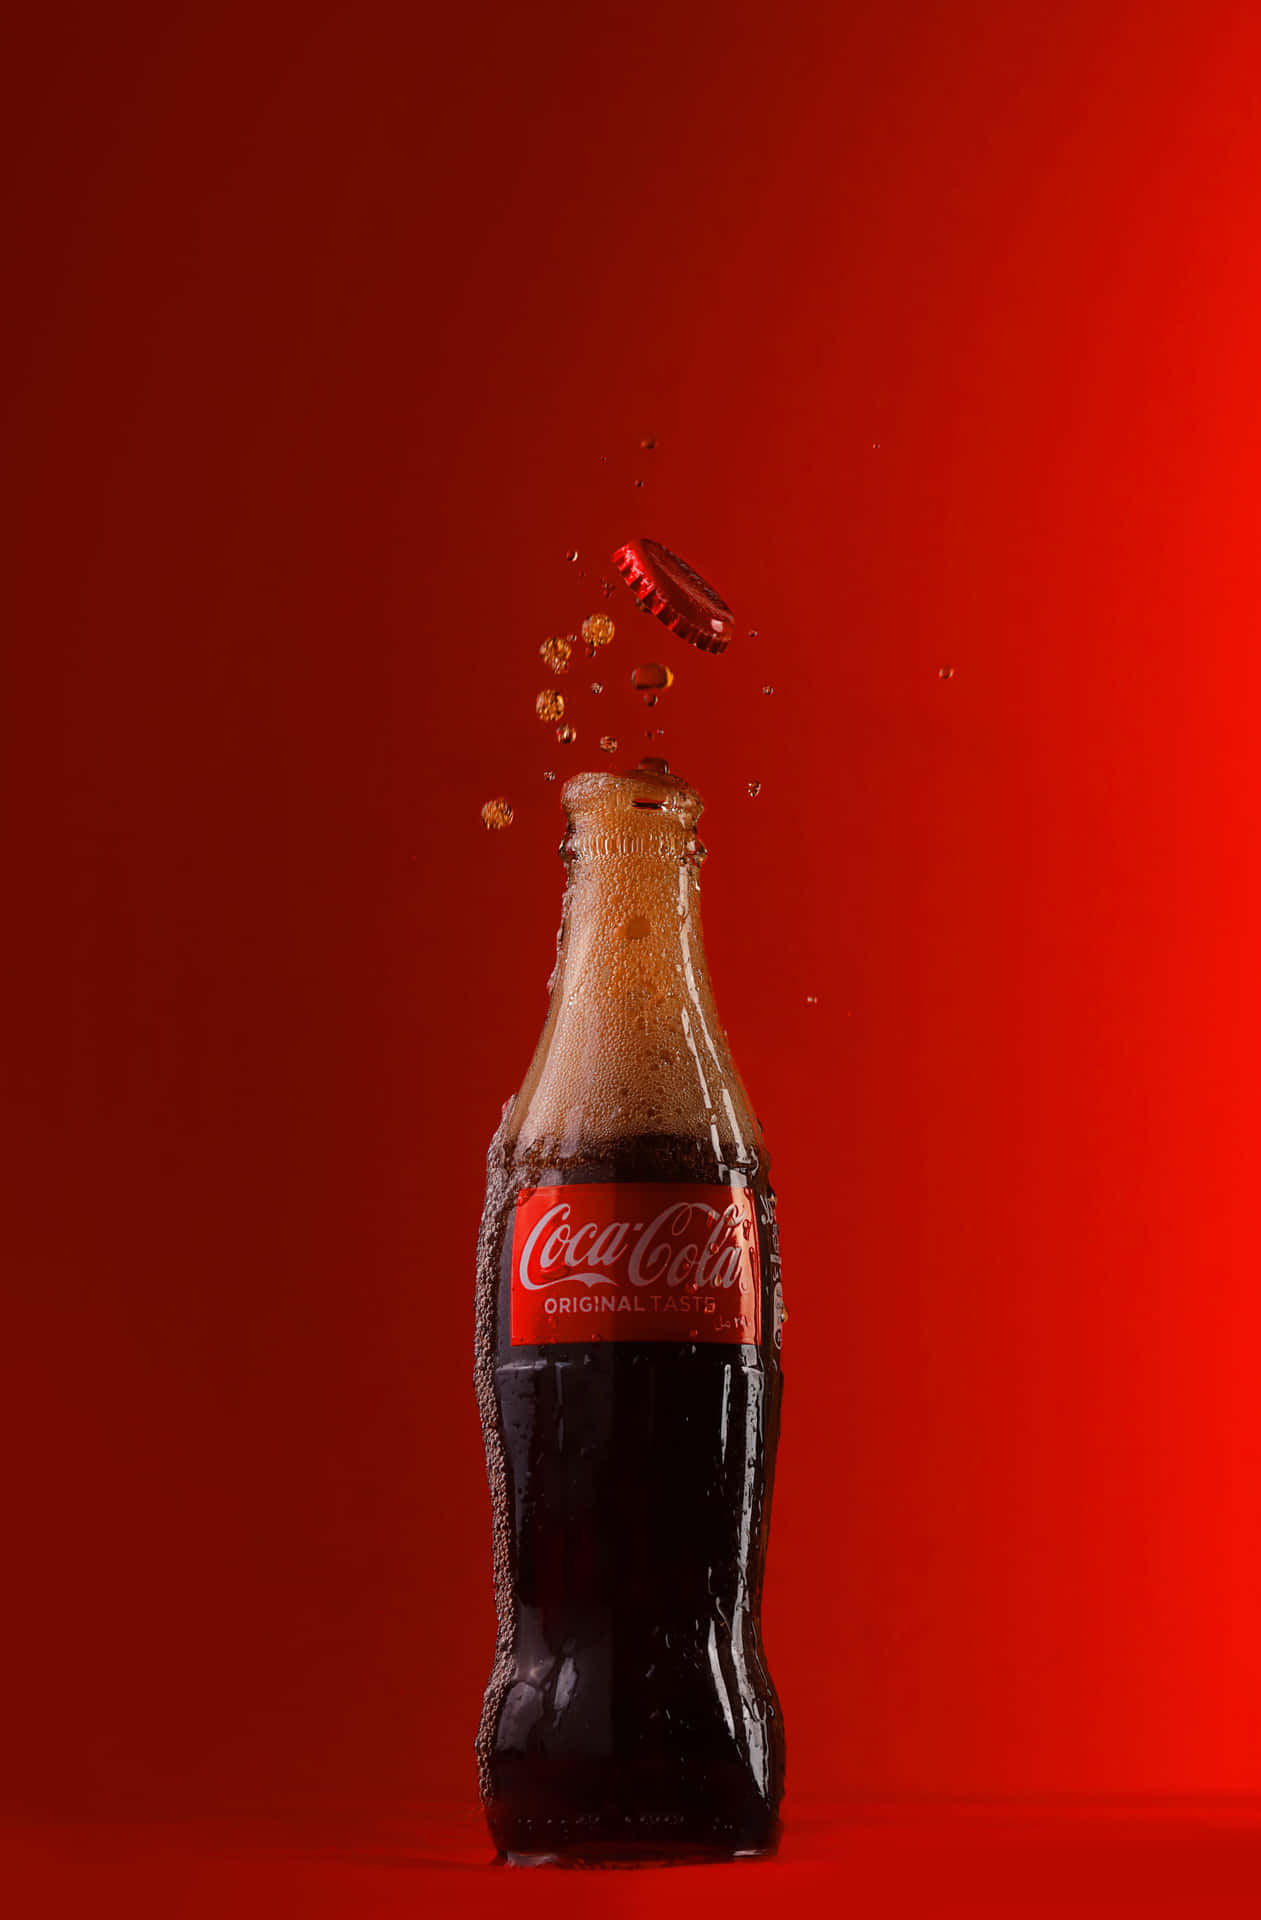 Coca Cola Bottle Falling On Red Background